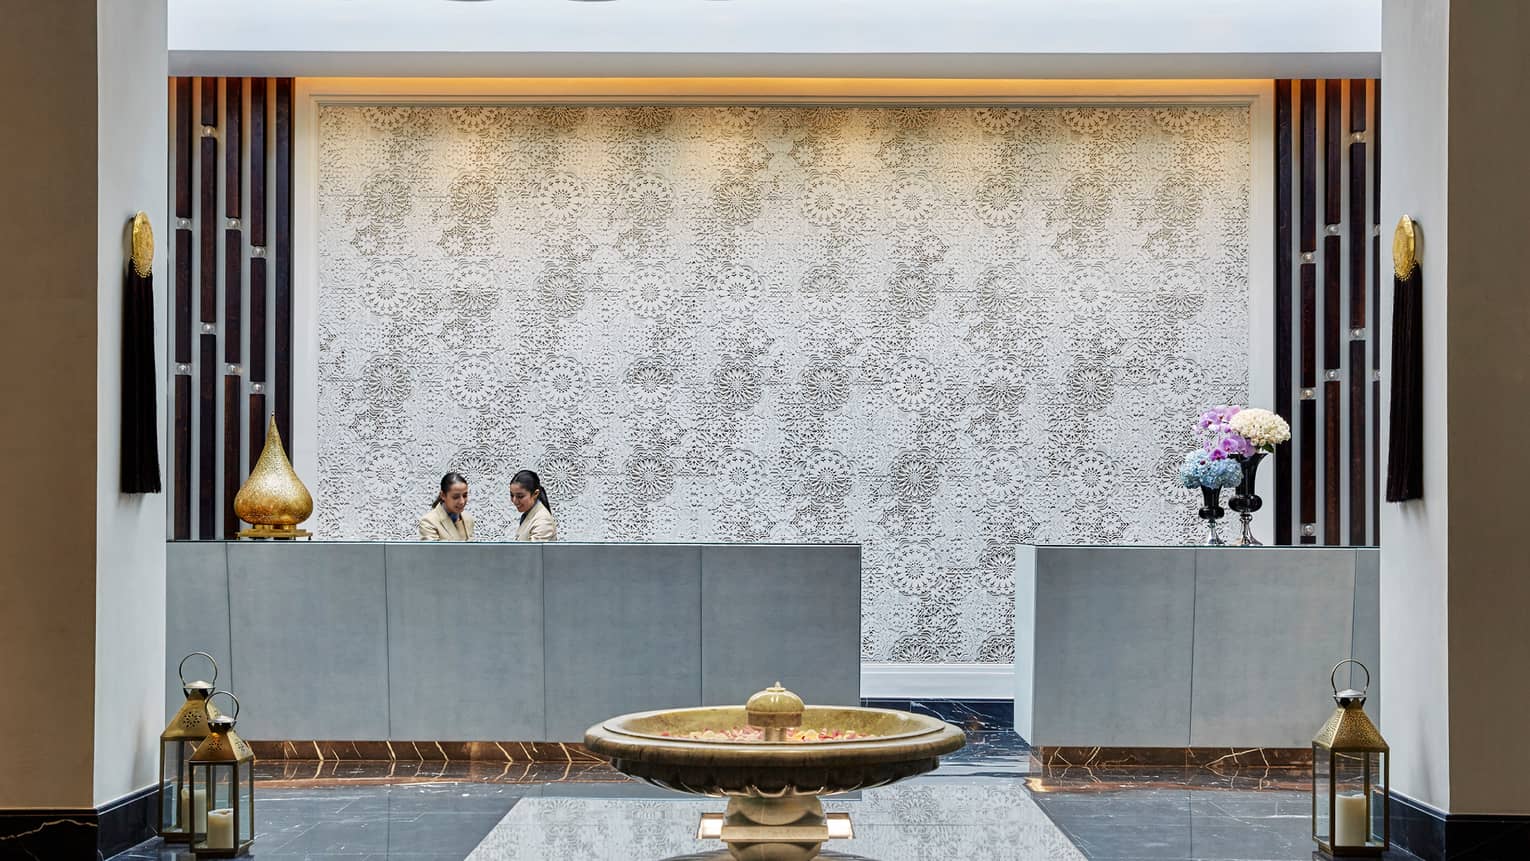 Staff at hotel reception desk in lobby with white mosaic backdrop